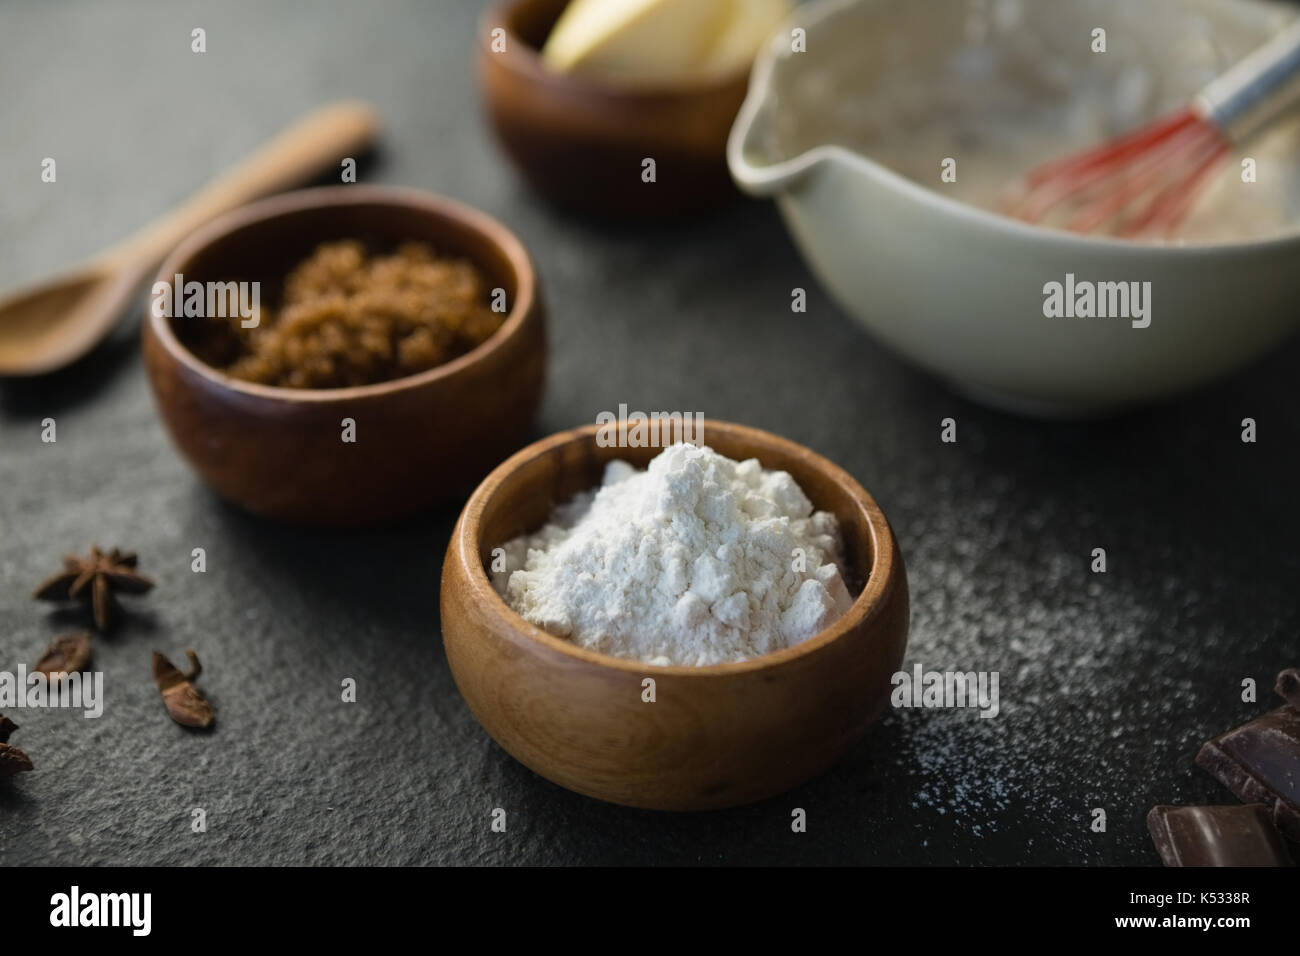 Close up of flour and grounded food on table Stock Photo